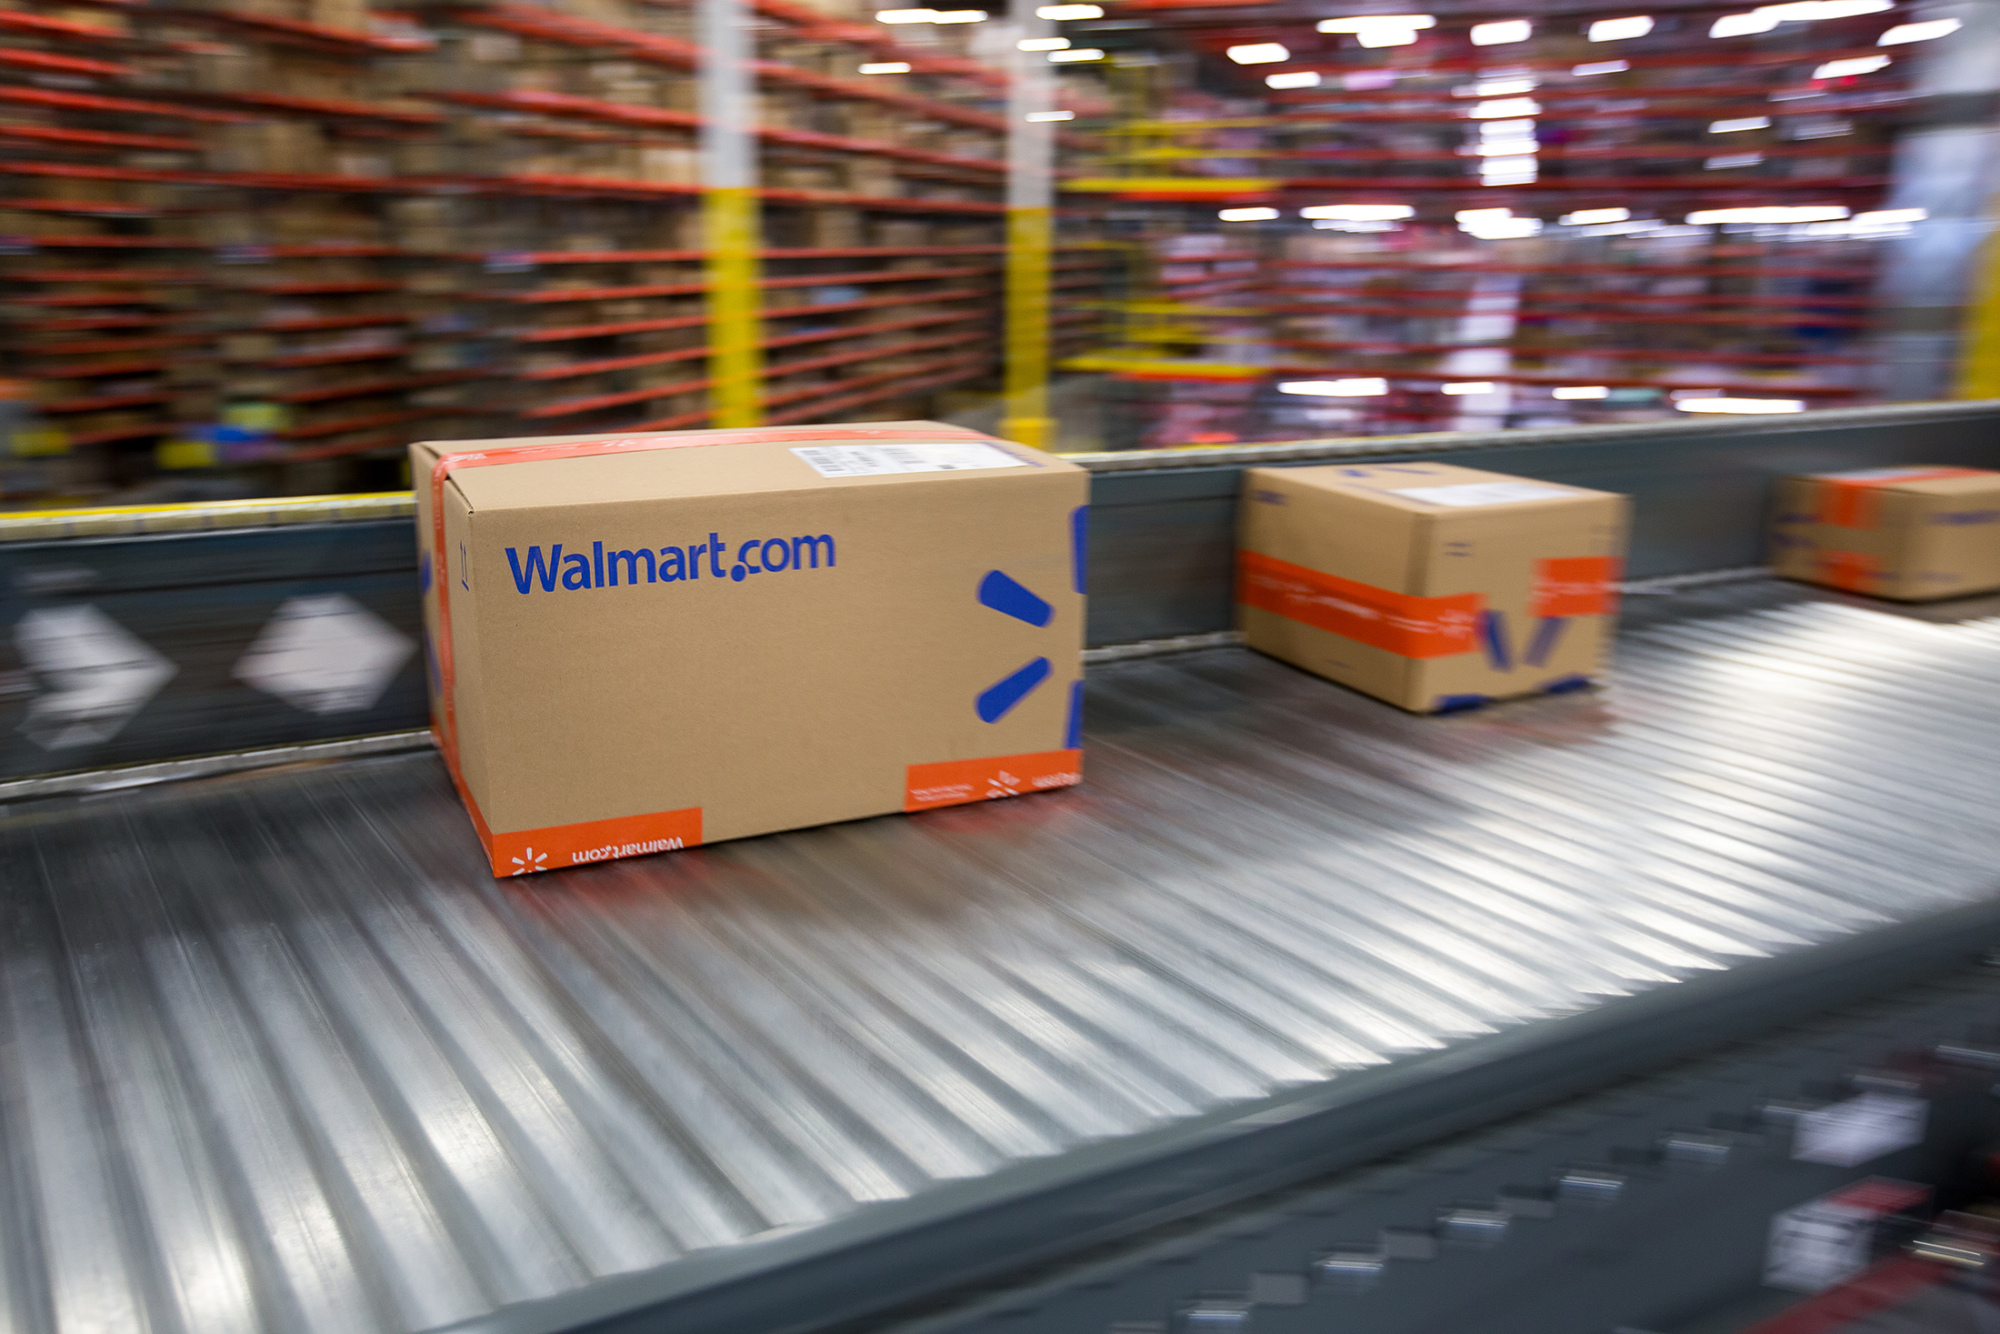 Packages move along a conveyor belt inside a Wal-Mart Stores Inc. fulfillment center in Bethlehem, Pennsylvania, U.S., on Wednesday, March 29, 2017.
